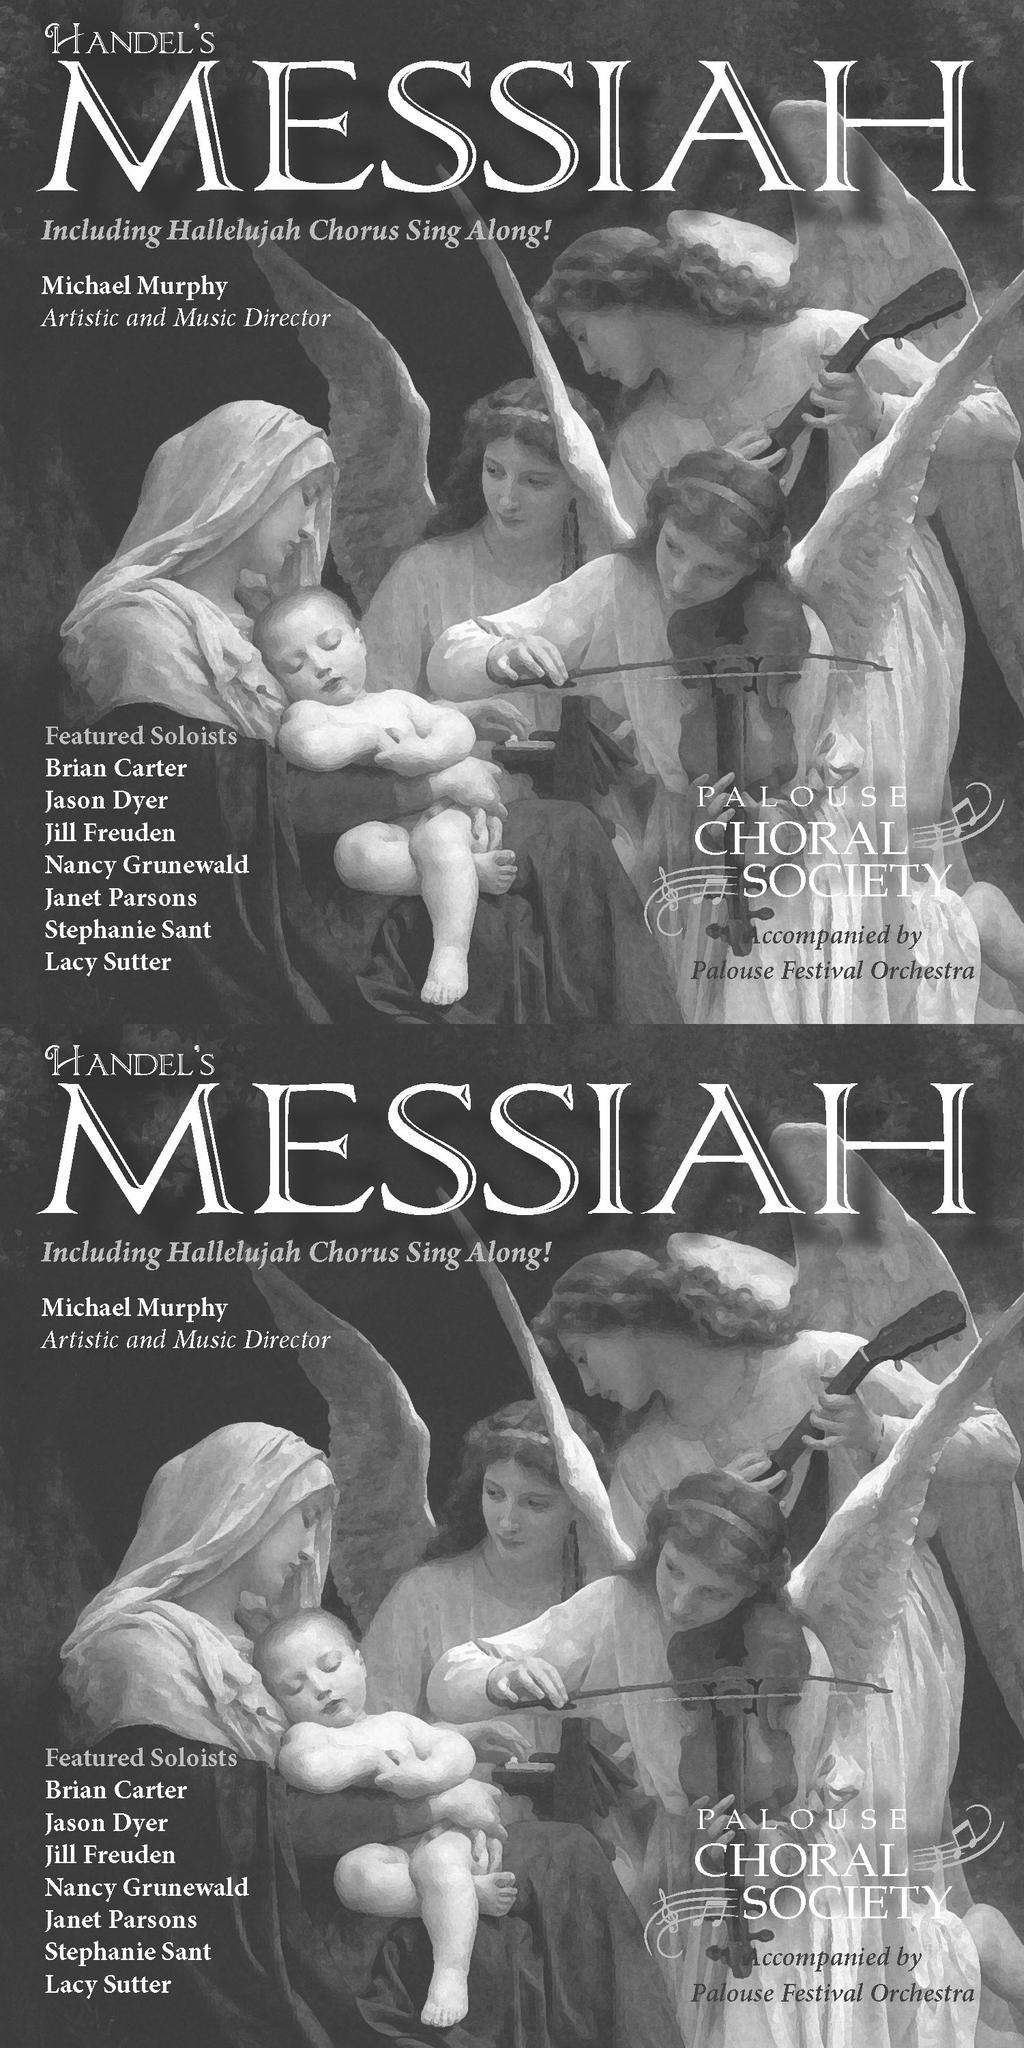 Messiah AND Creation CDs are now available